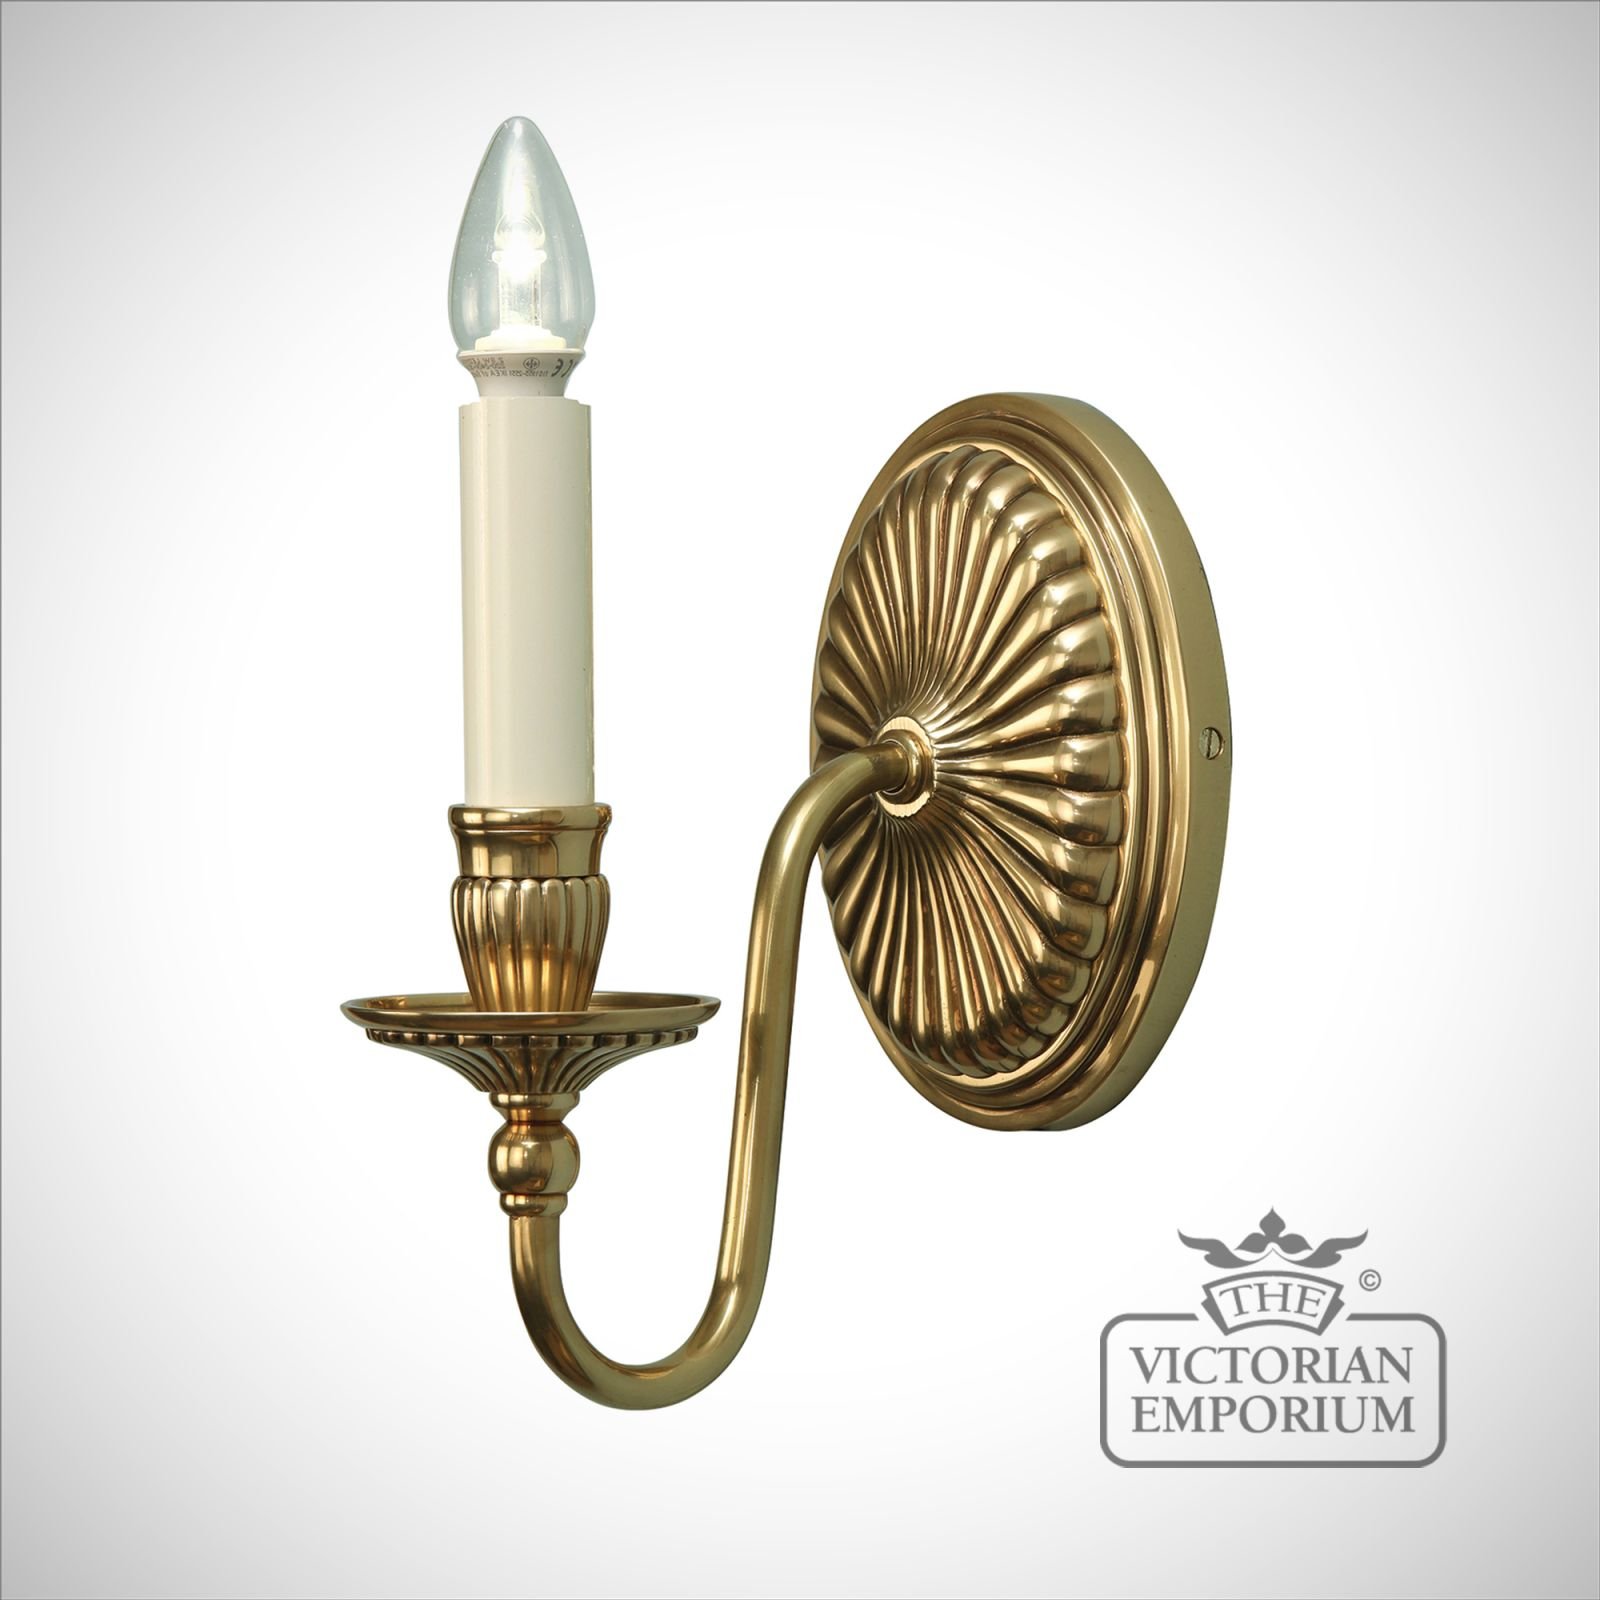 Fitzroy single wall sconce with or without shades